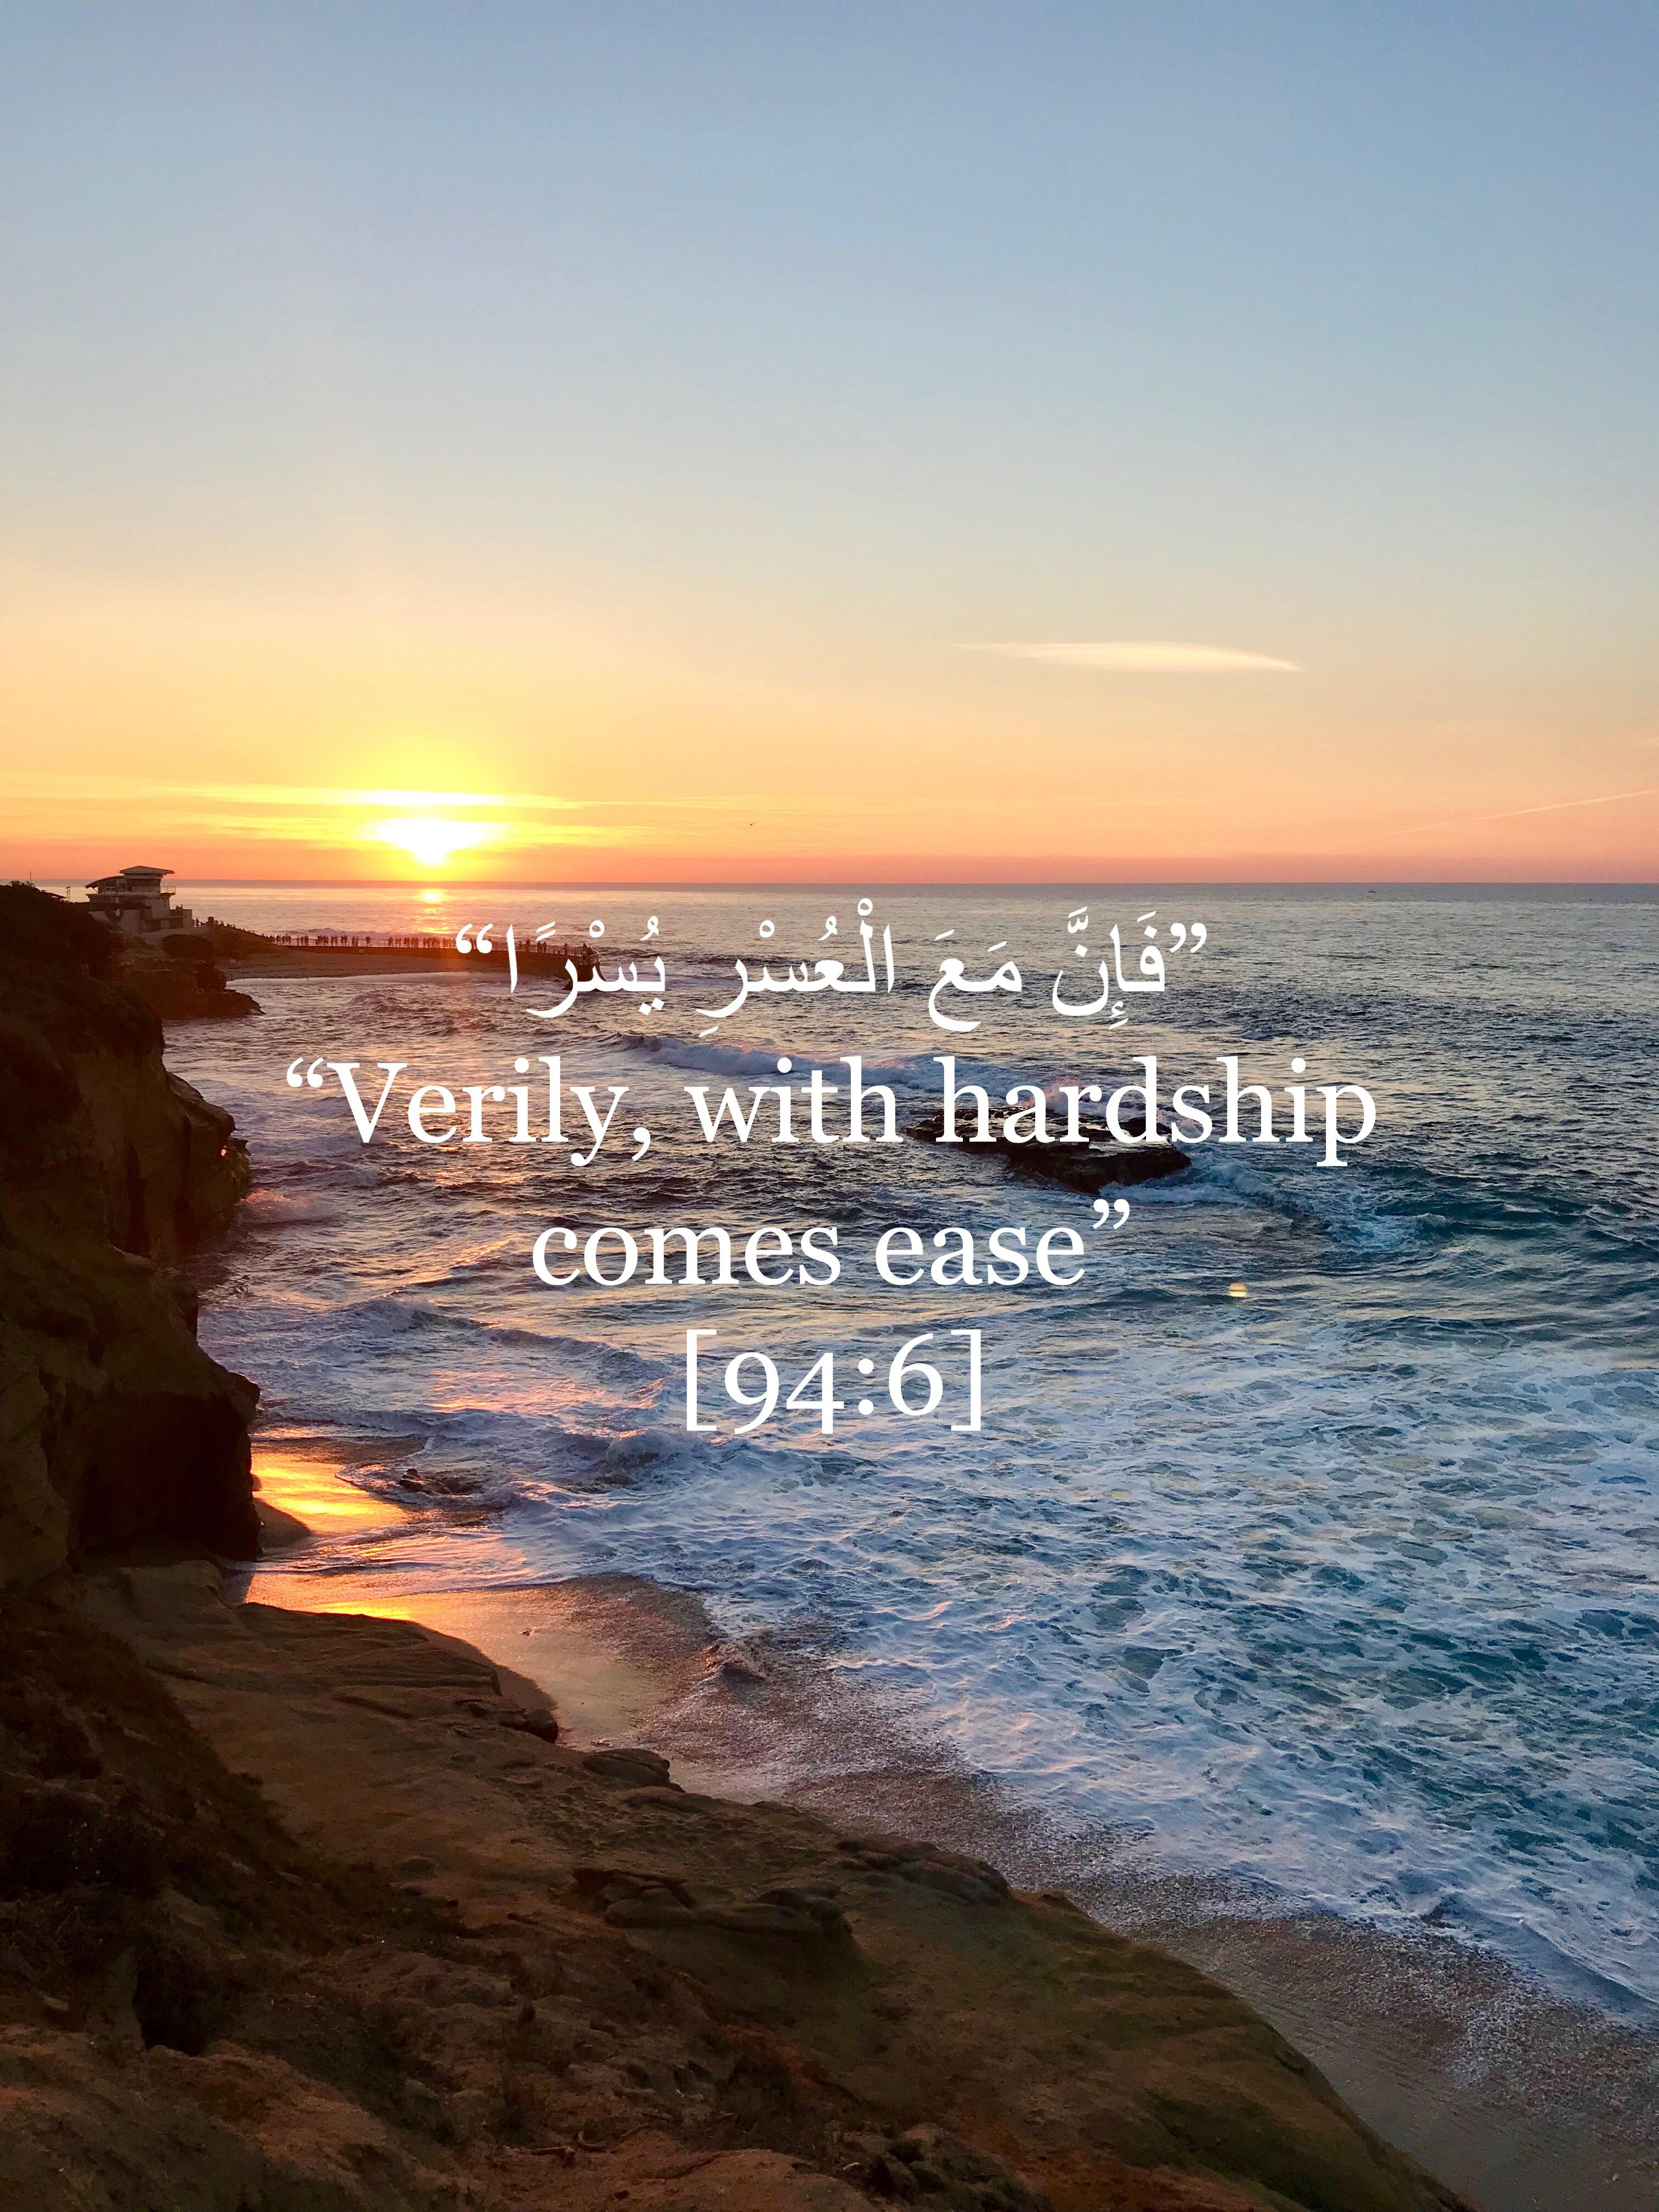 I made this wallpaper to remind me that everything will get better and felt like sharing: islam